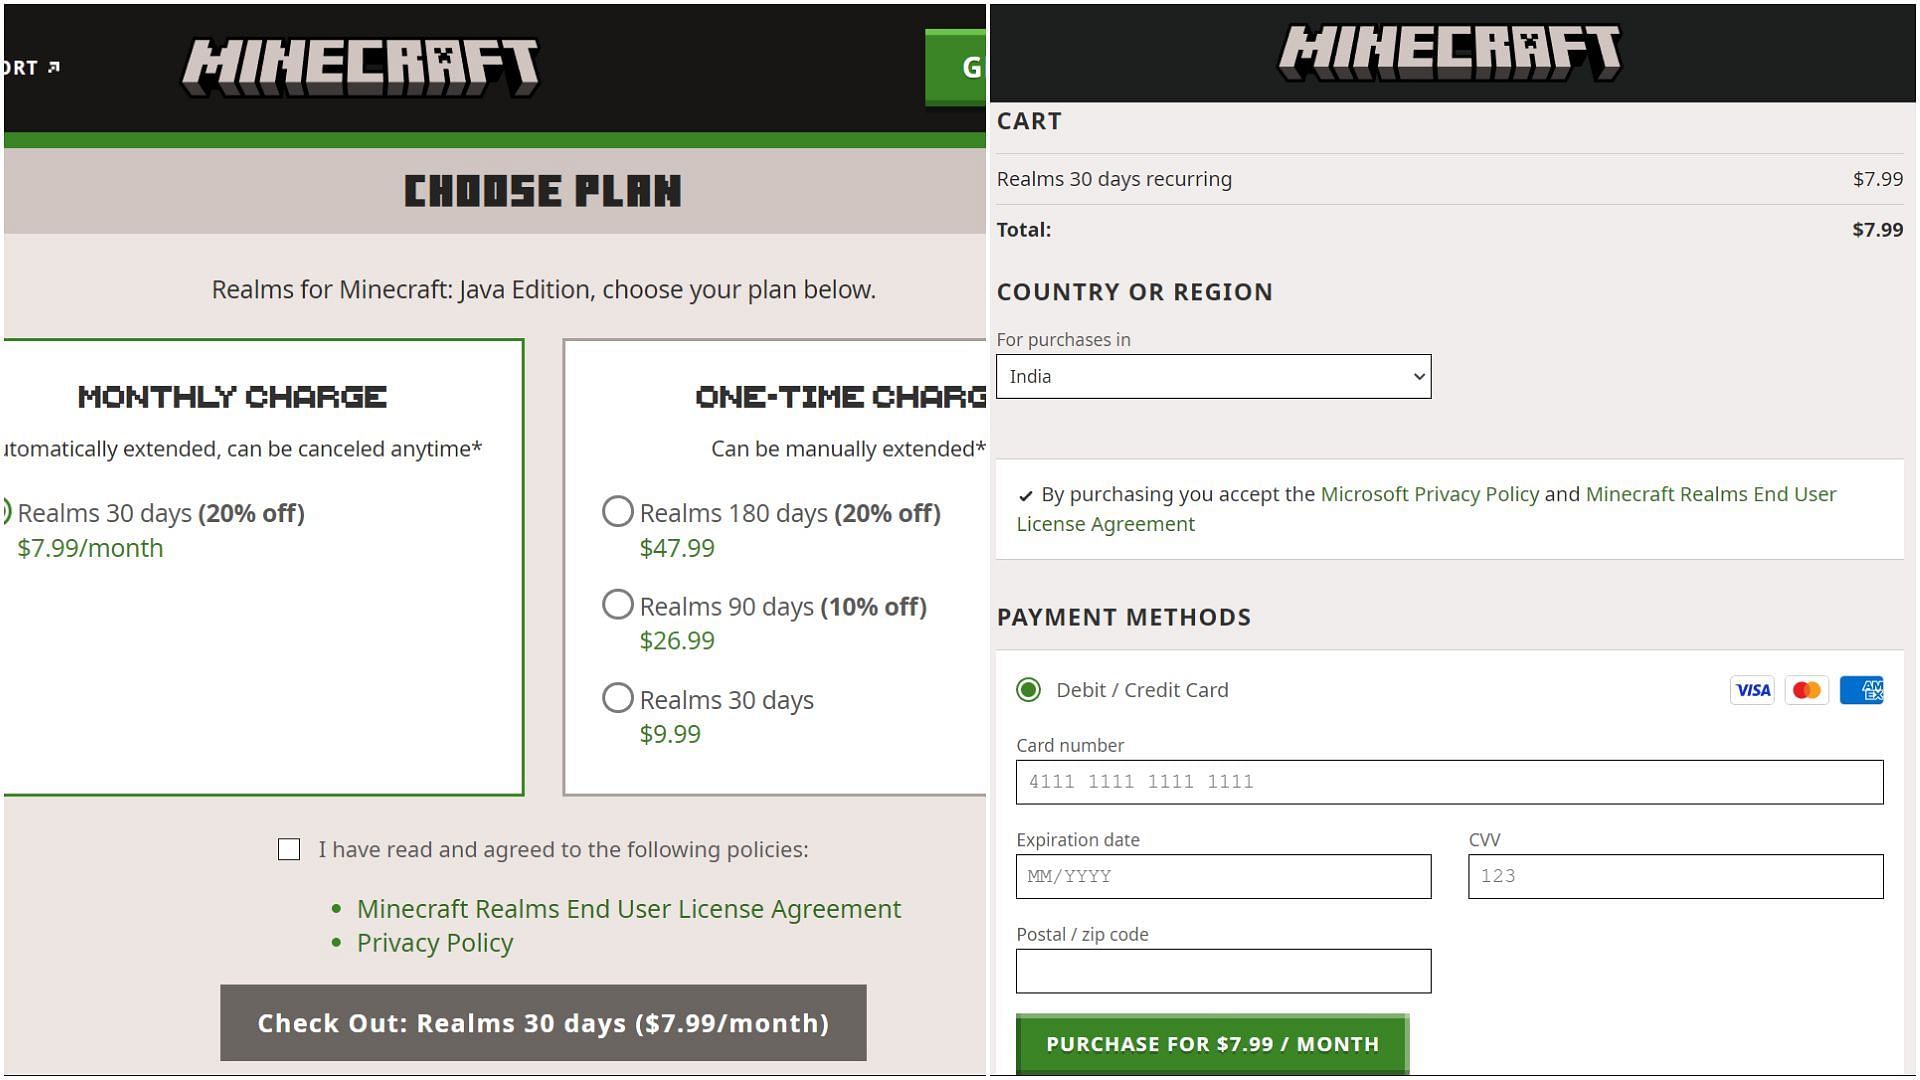 How to set up a Minecraft Realms multiplayer server